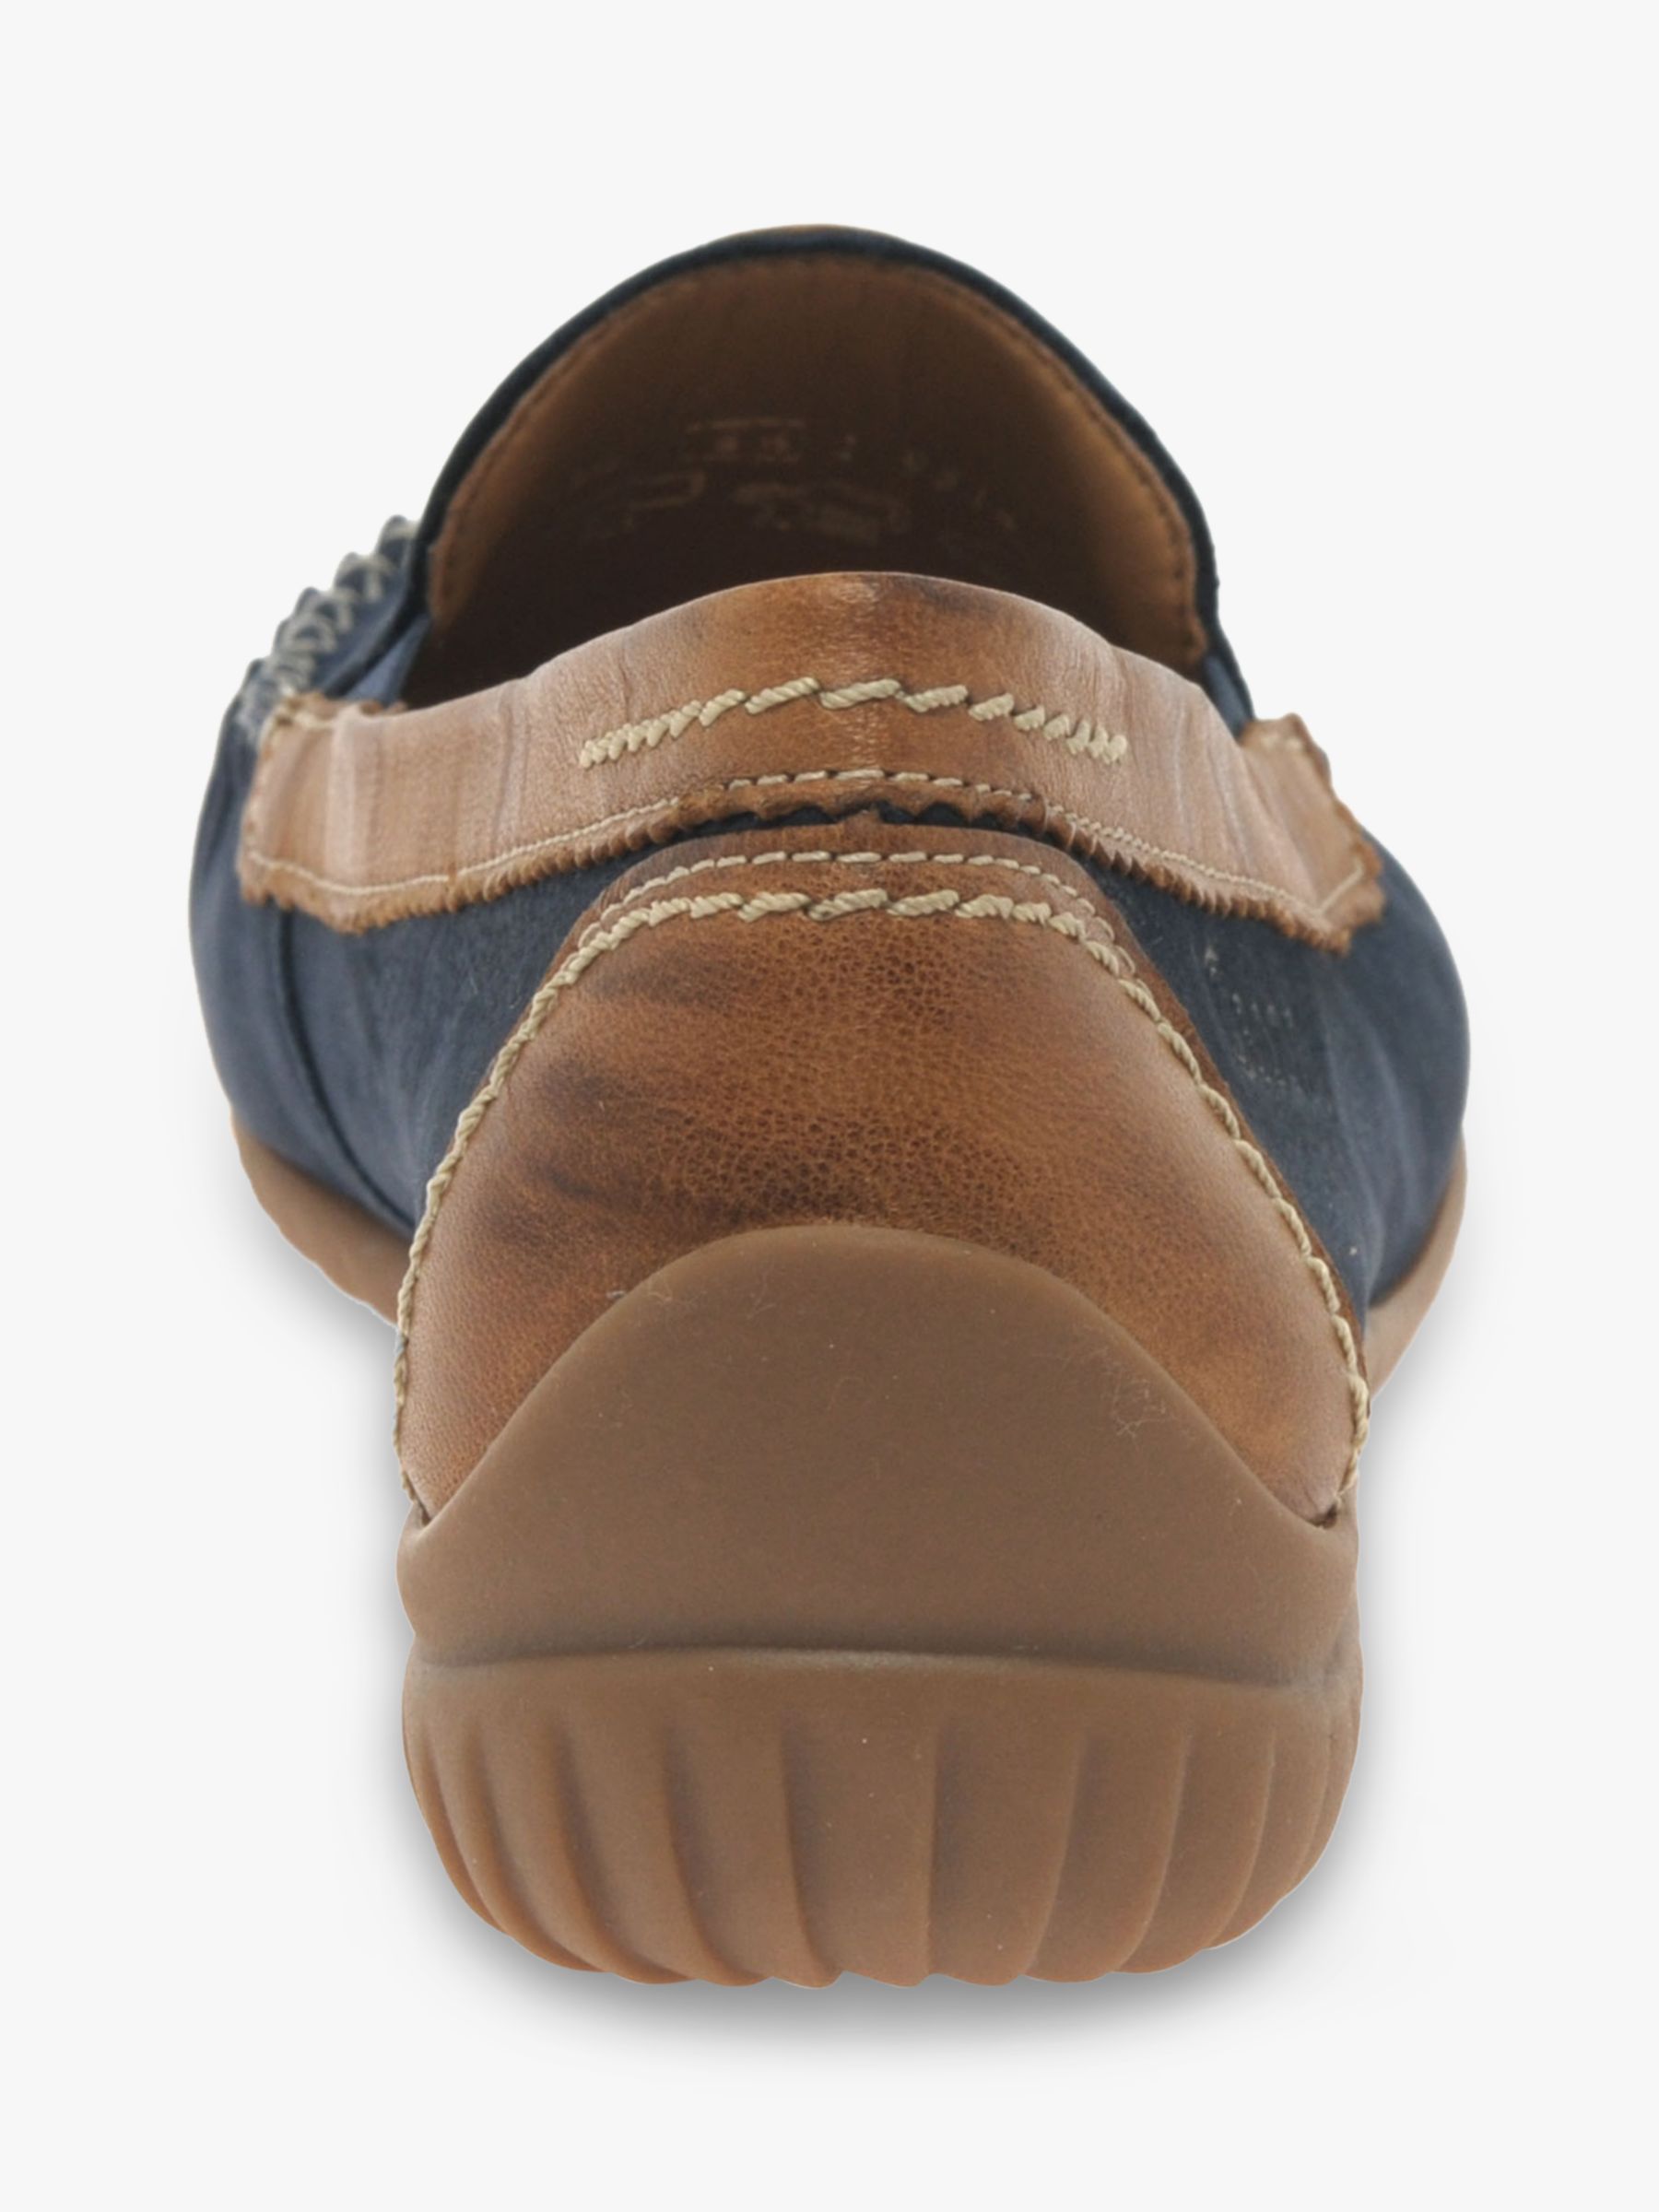 Gabor California Wide Fit Moccasins, Navy, 4